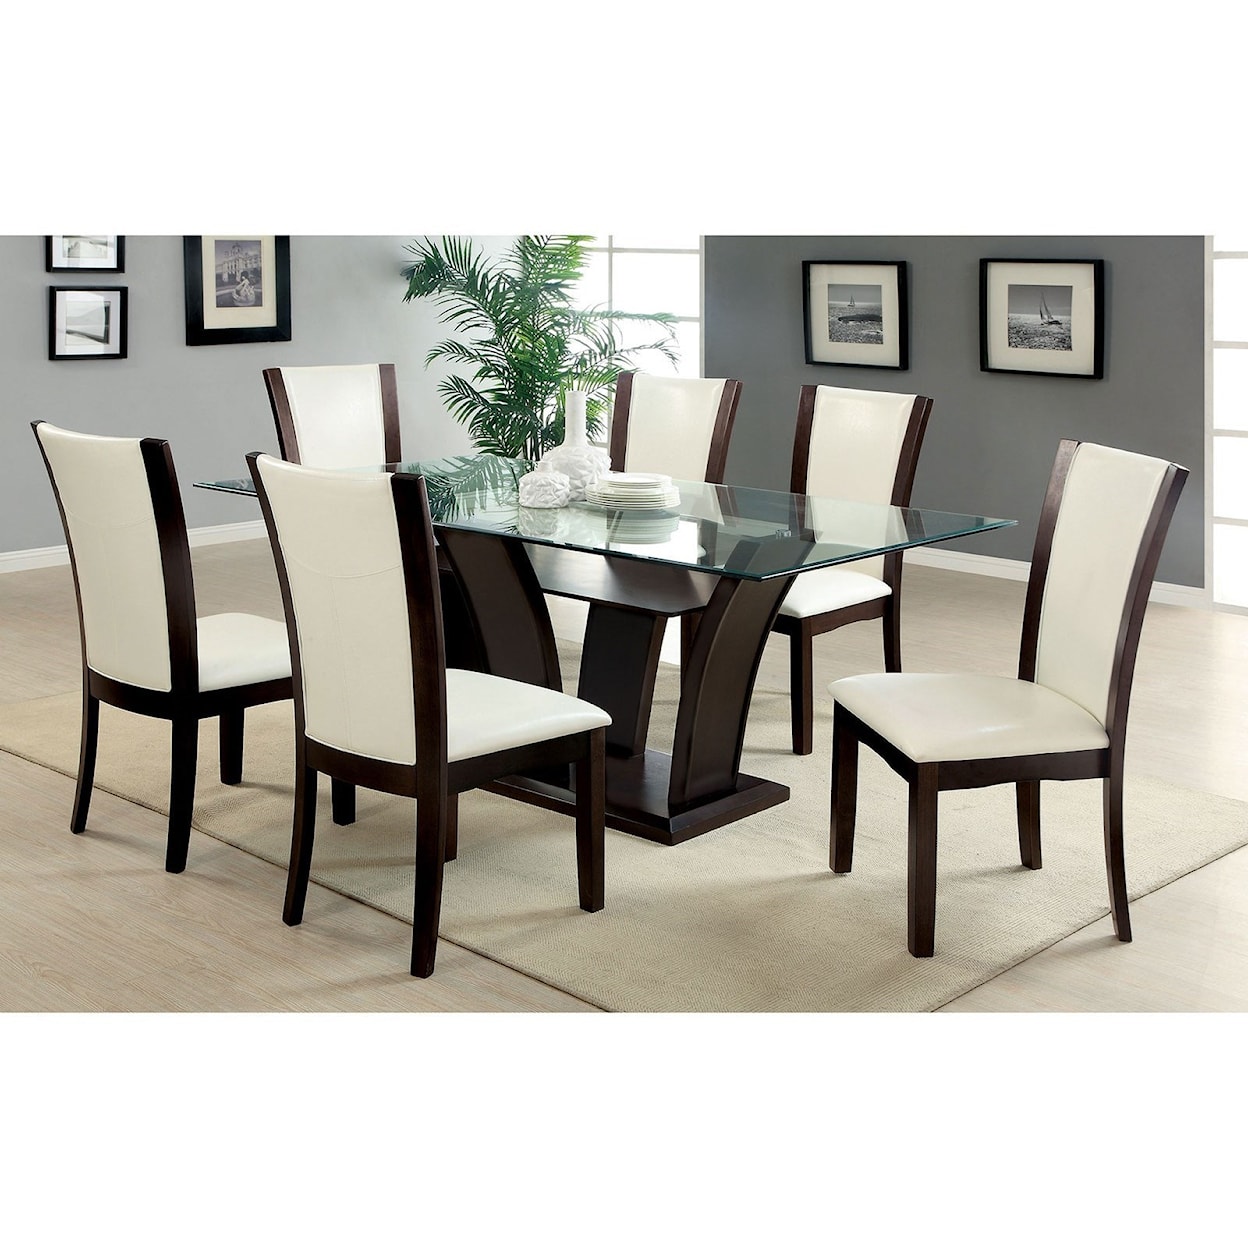 FUSA Manhattan I & II Table and 6 Side Chairs